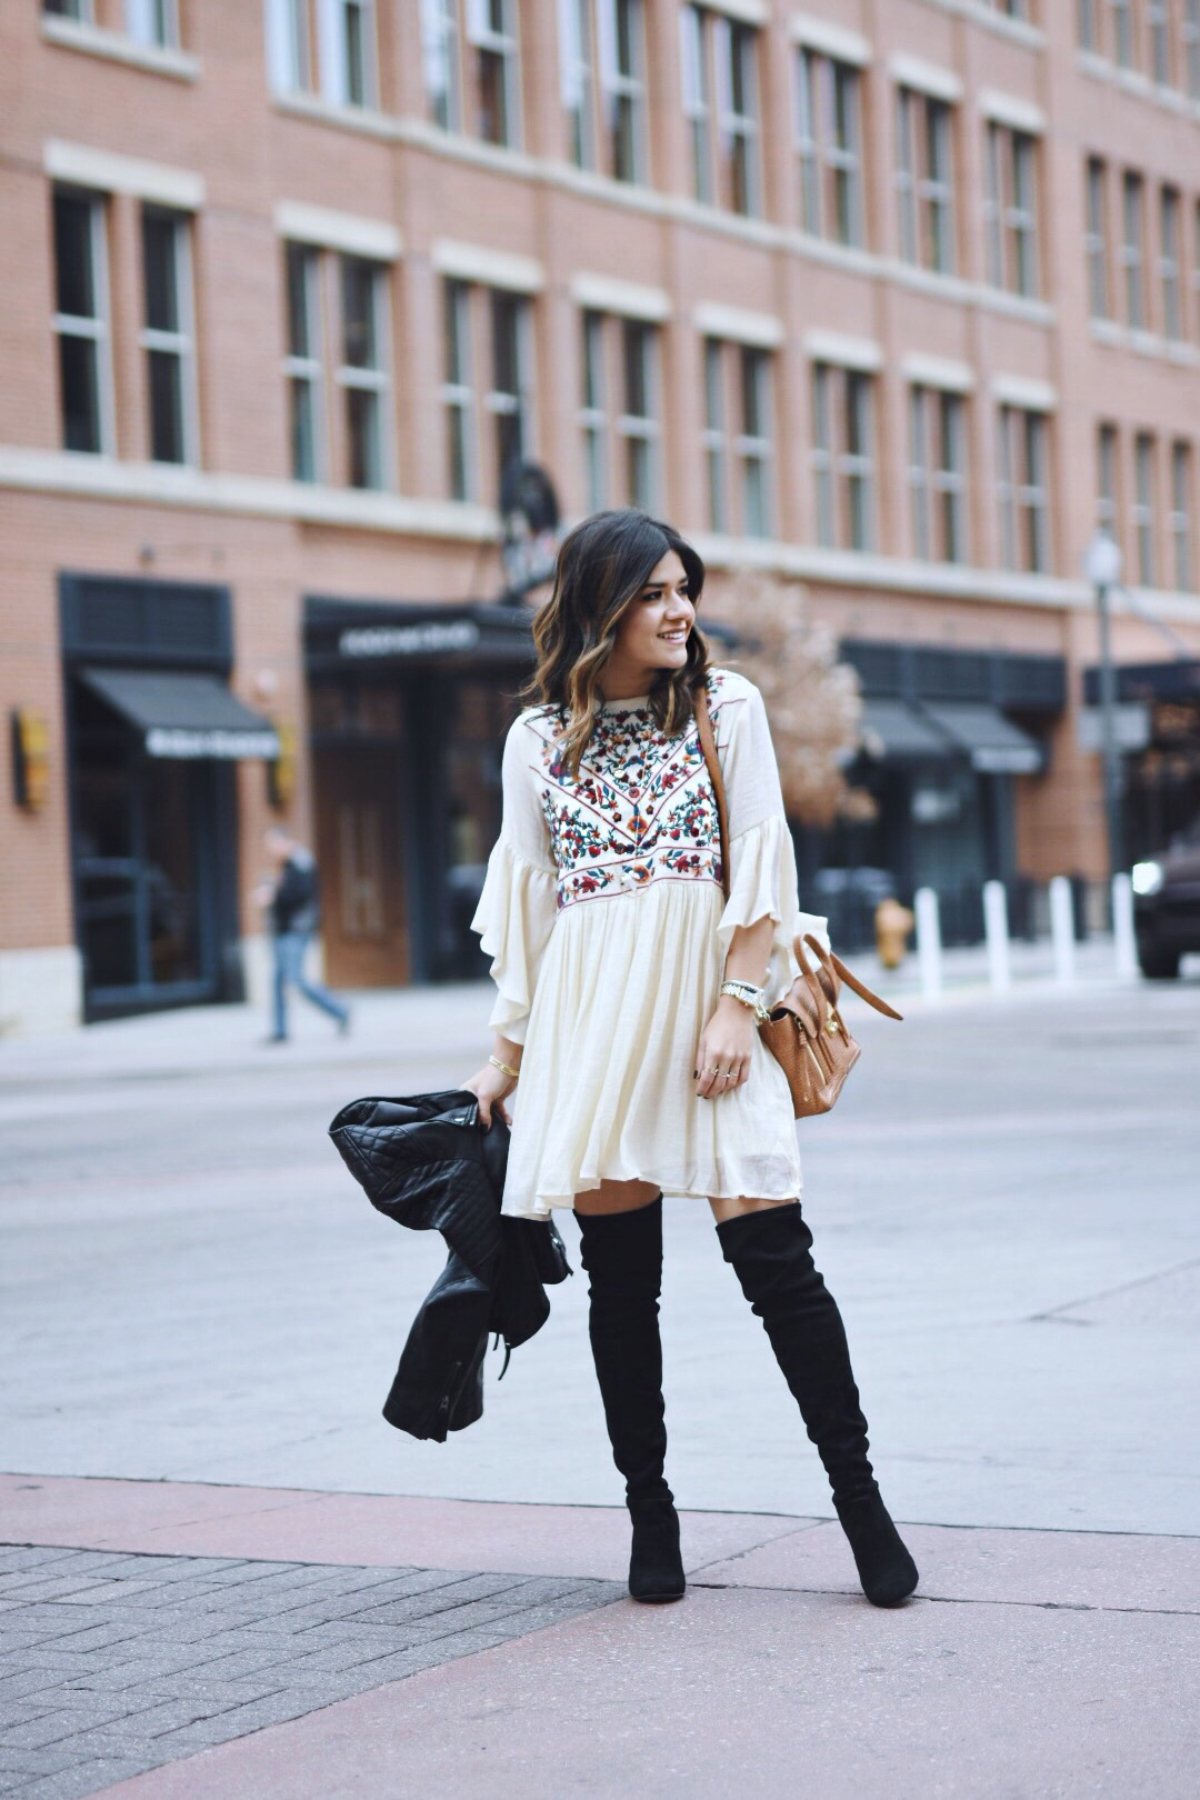 Carolina Hellal of Chic Talk wearing an Altar'd State dress, steve madden over the knee boots and 3.1 phillip lim bag